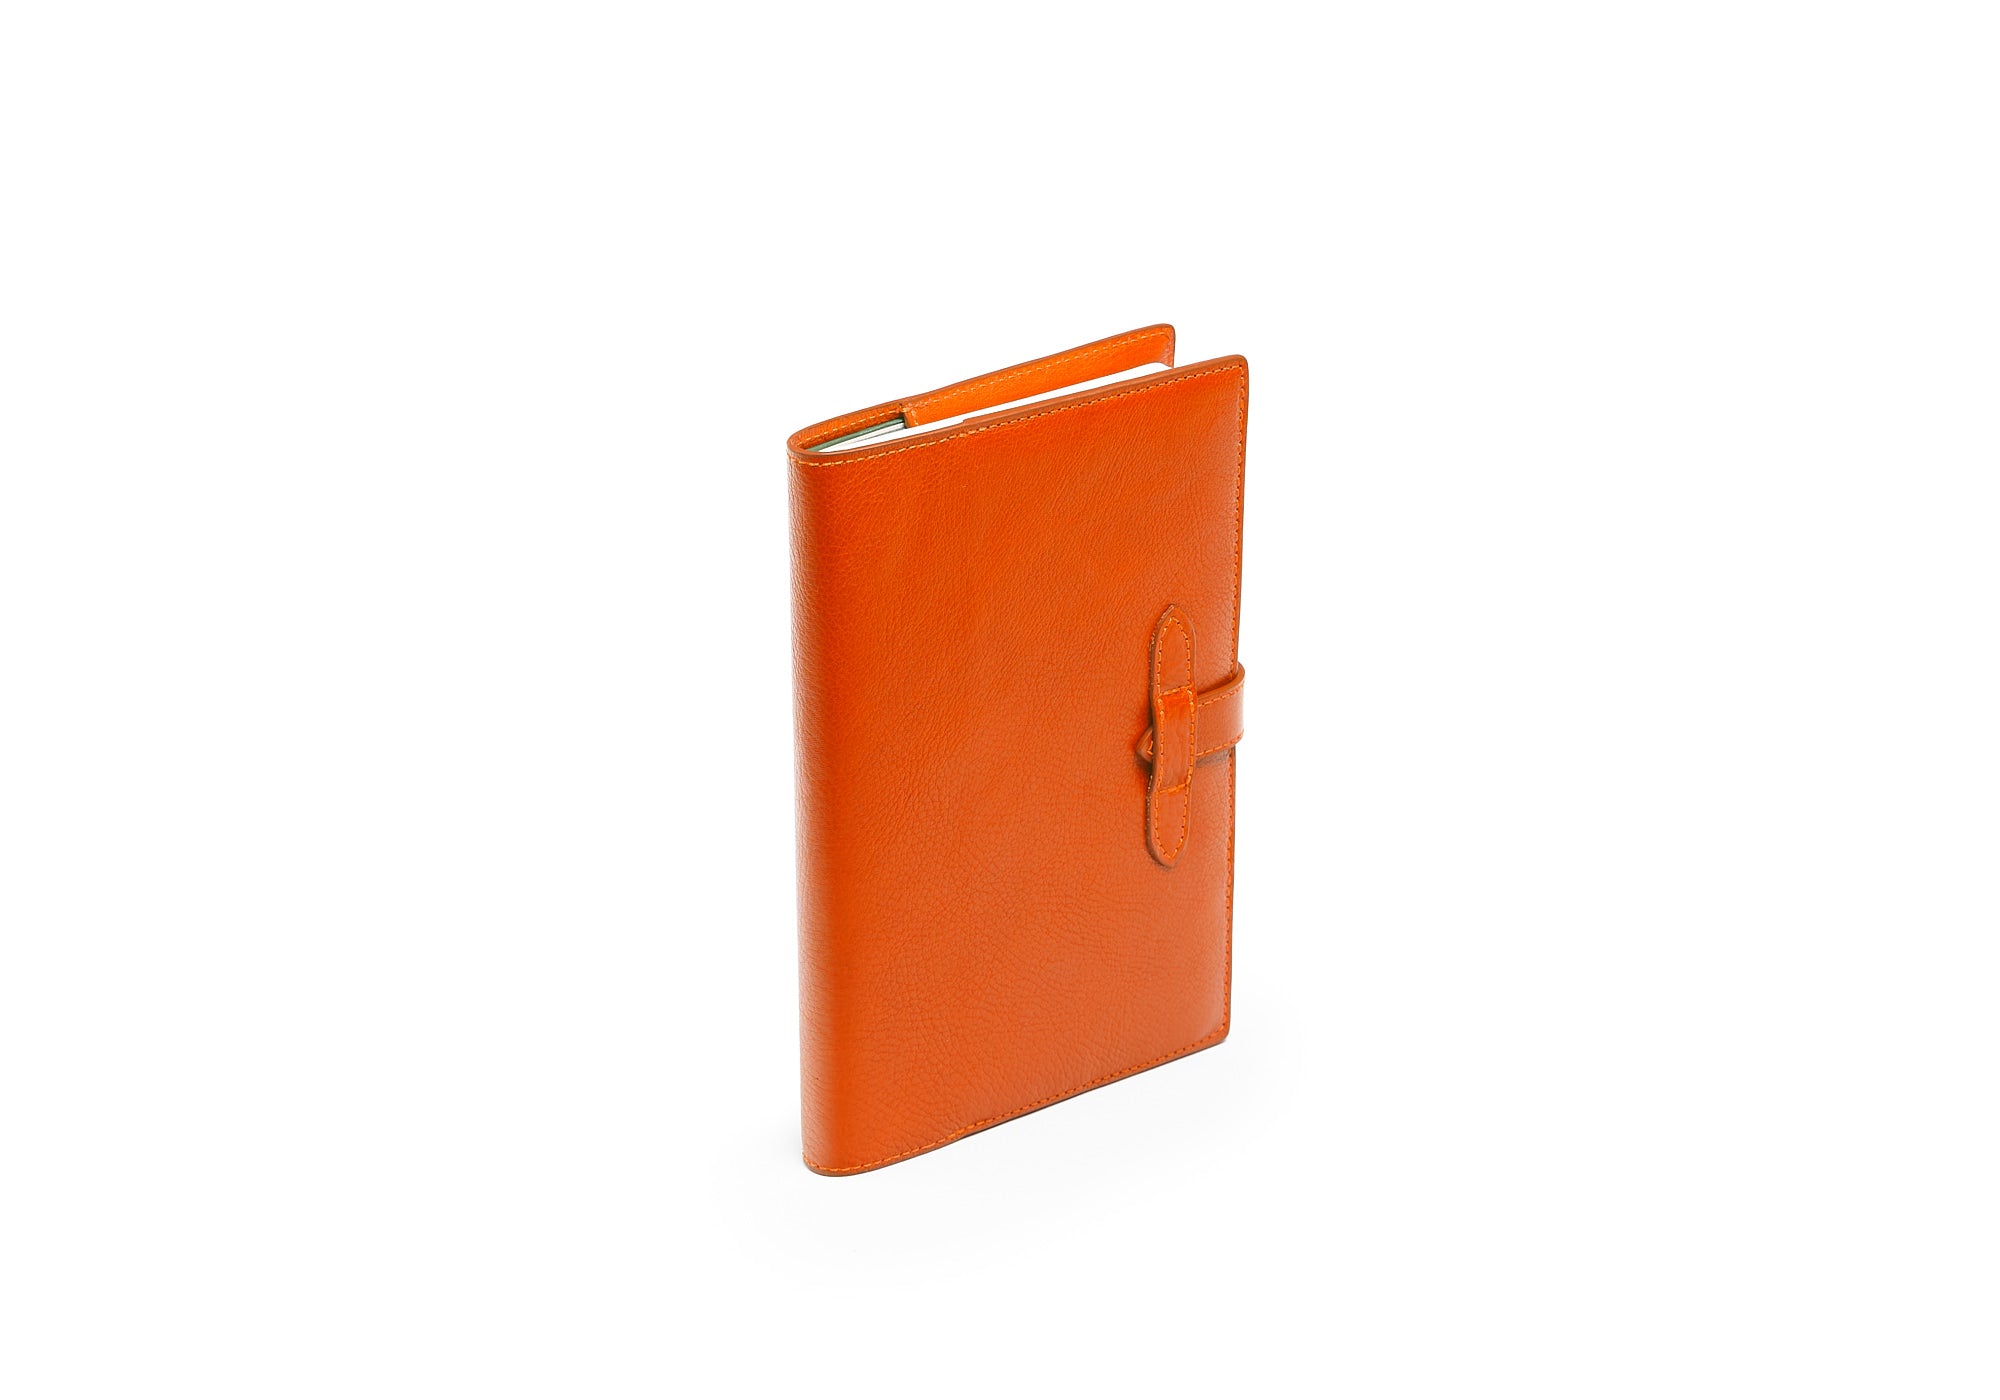 Side View of Leather Travel Journal Orange